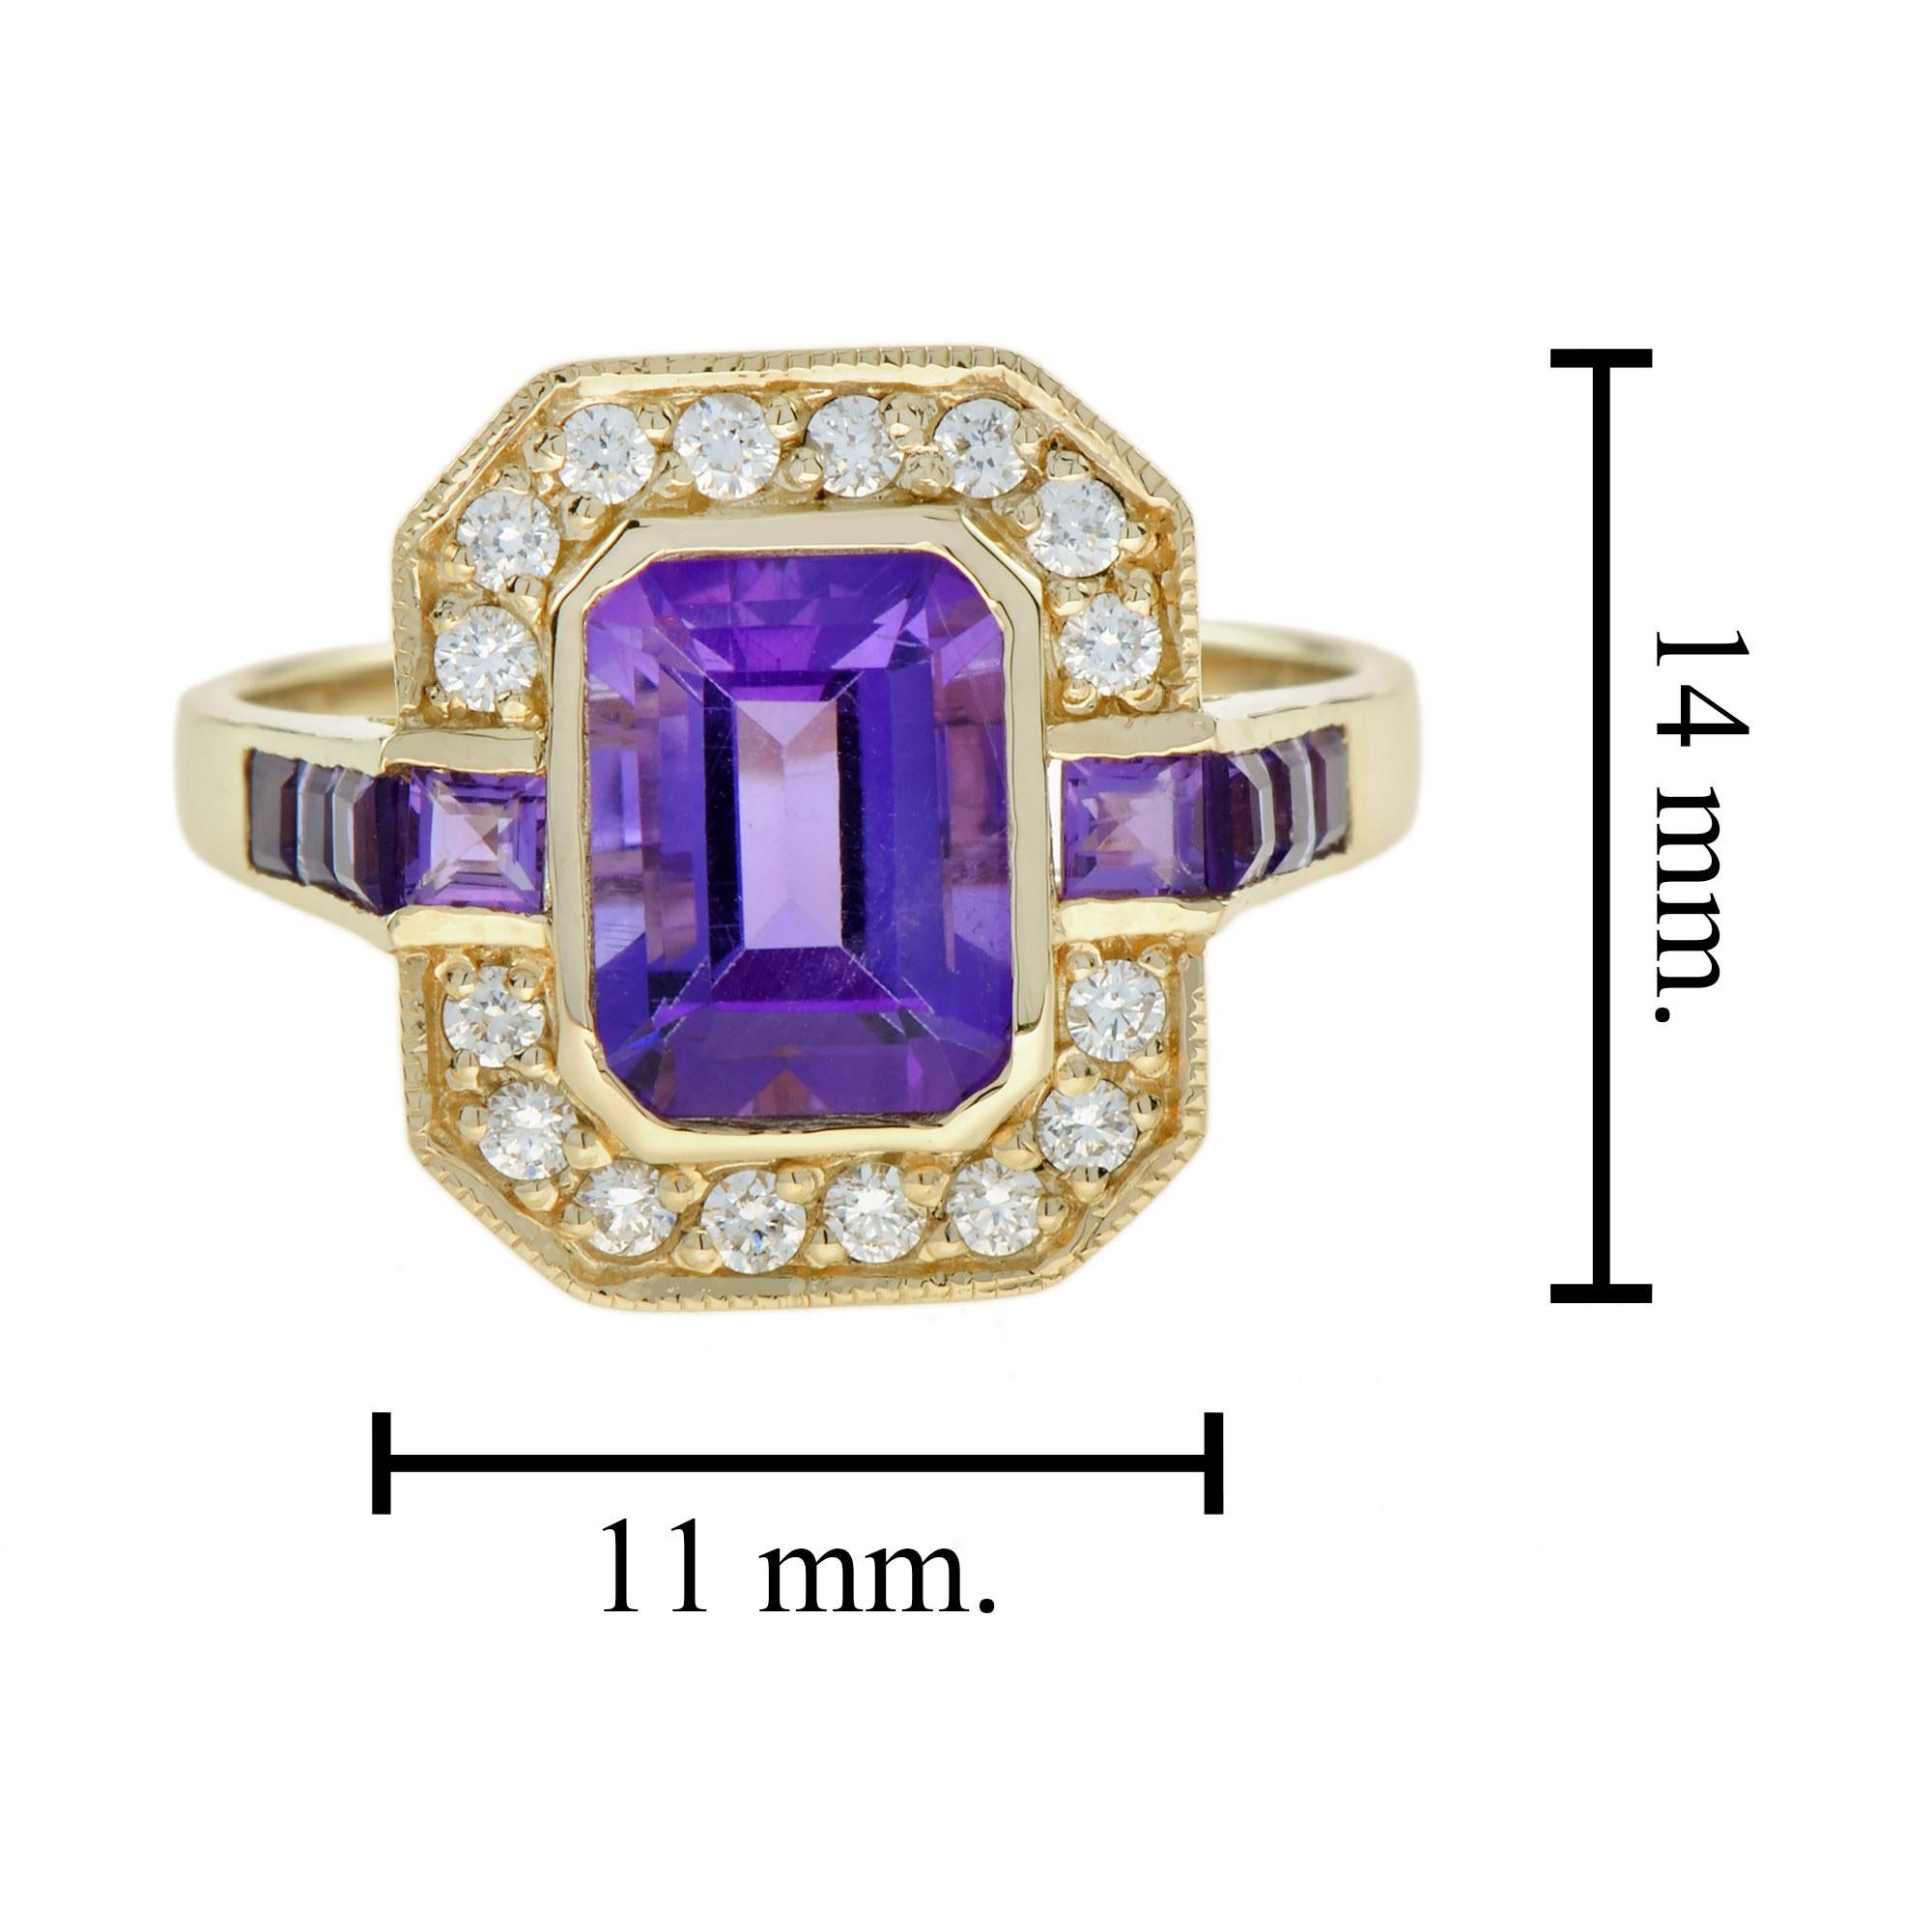 Emerald Cut Amethyst and Diamond Art Deco Style Halo Ring in 9K Yellow Gold 3